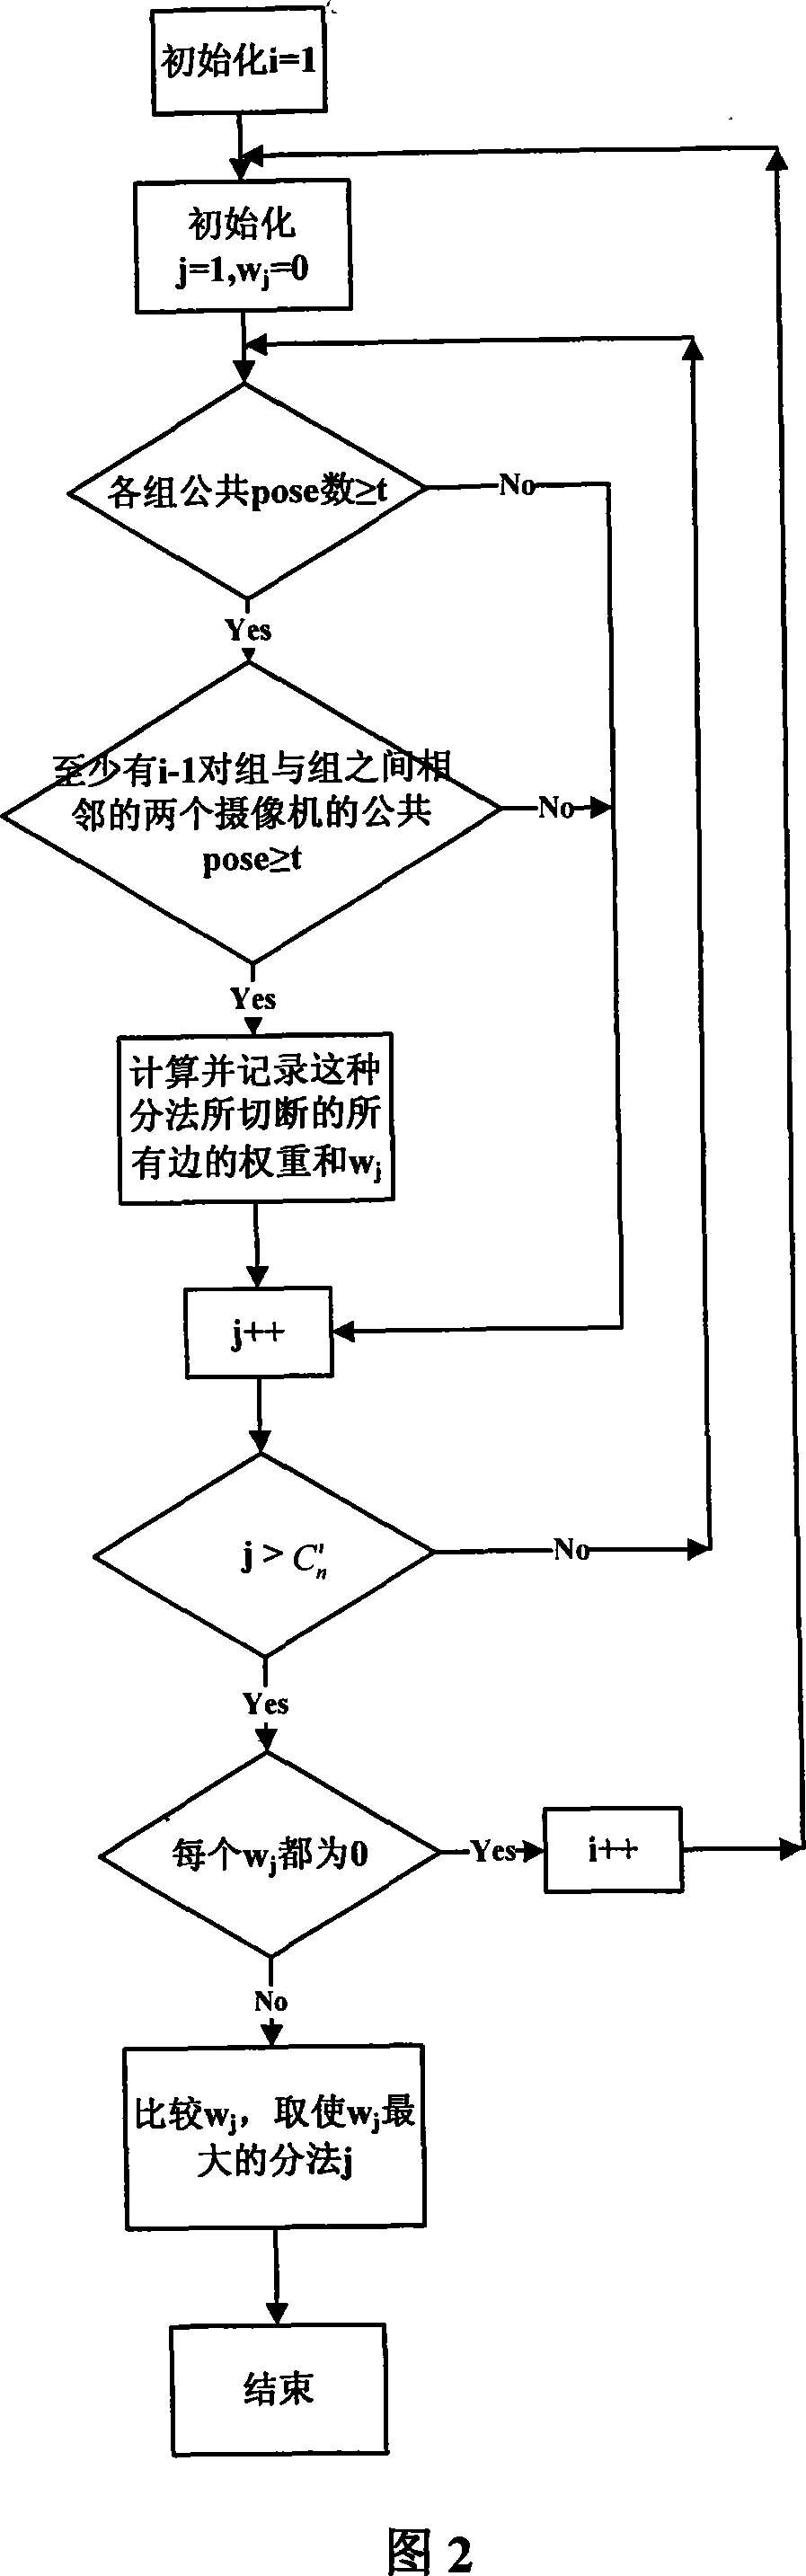 Annular video camera array calibration system and its method